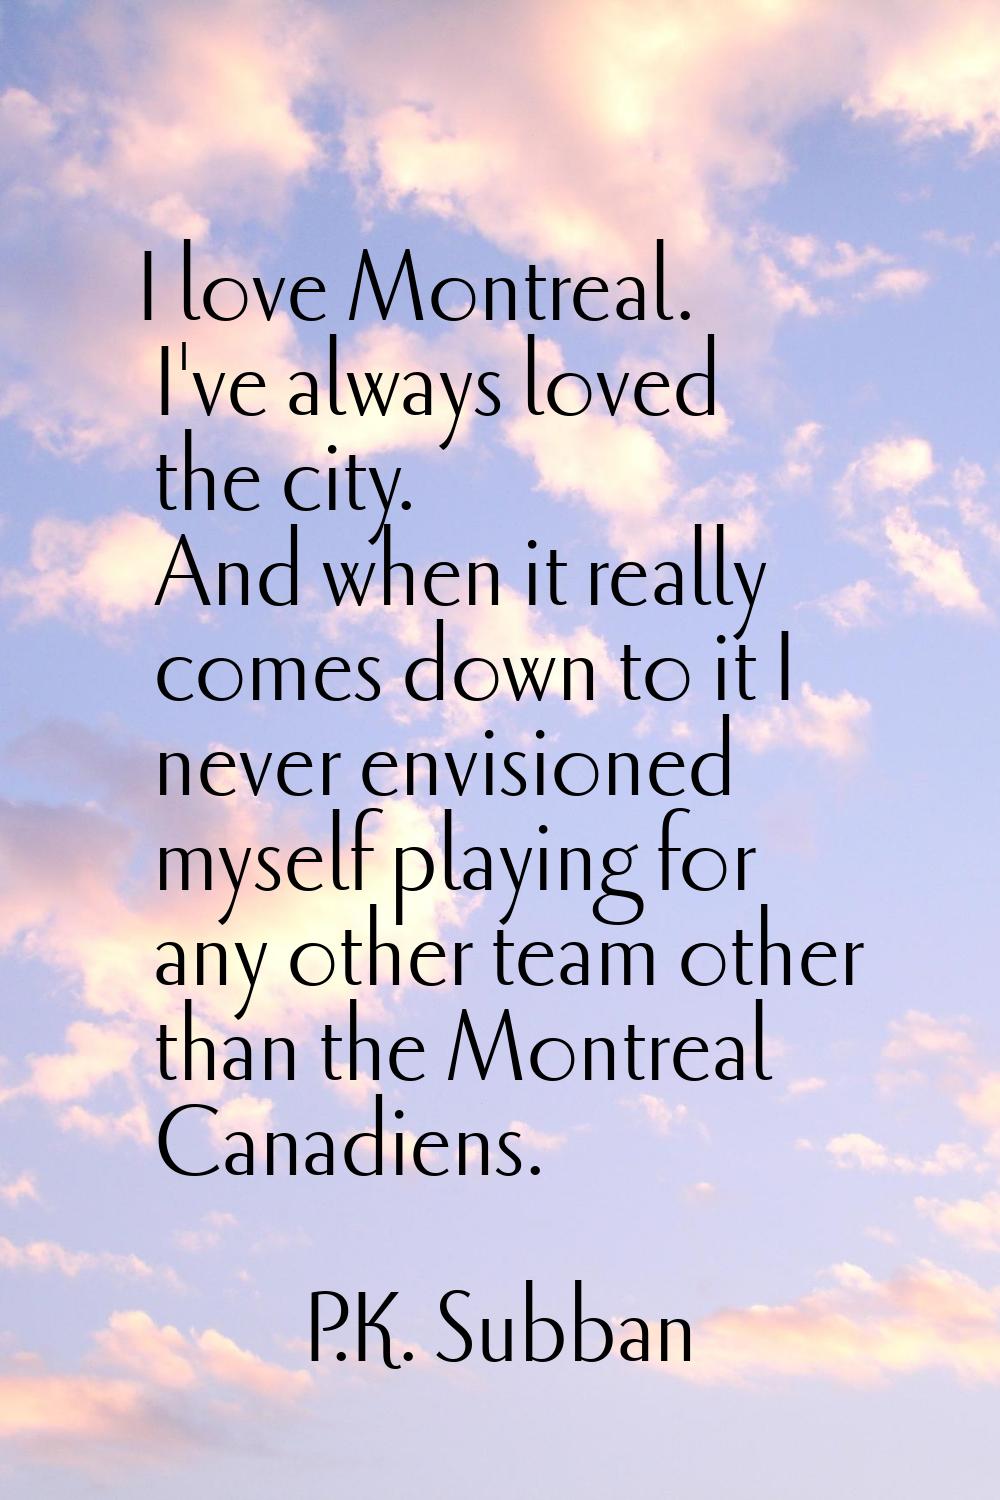 I love Montreal. I've always loved the city. And when it really comes down to it I never envisioned